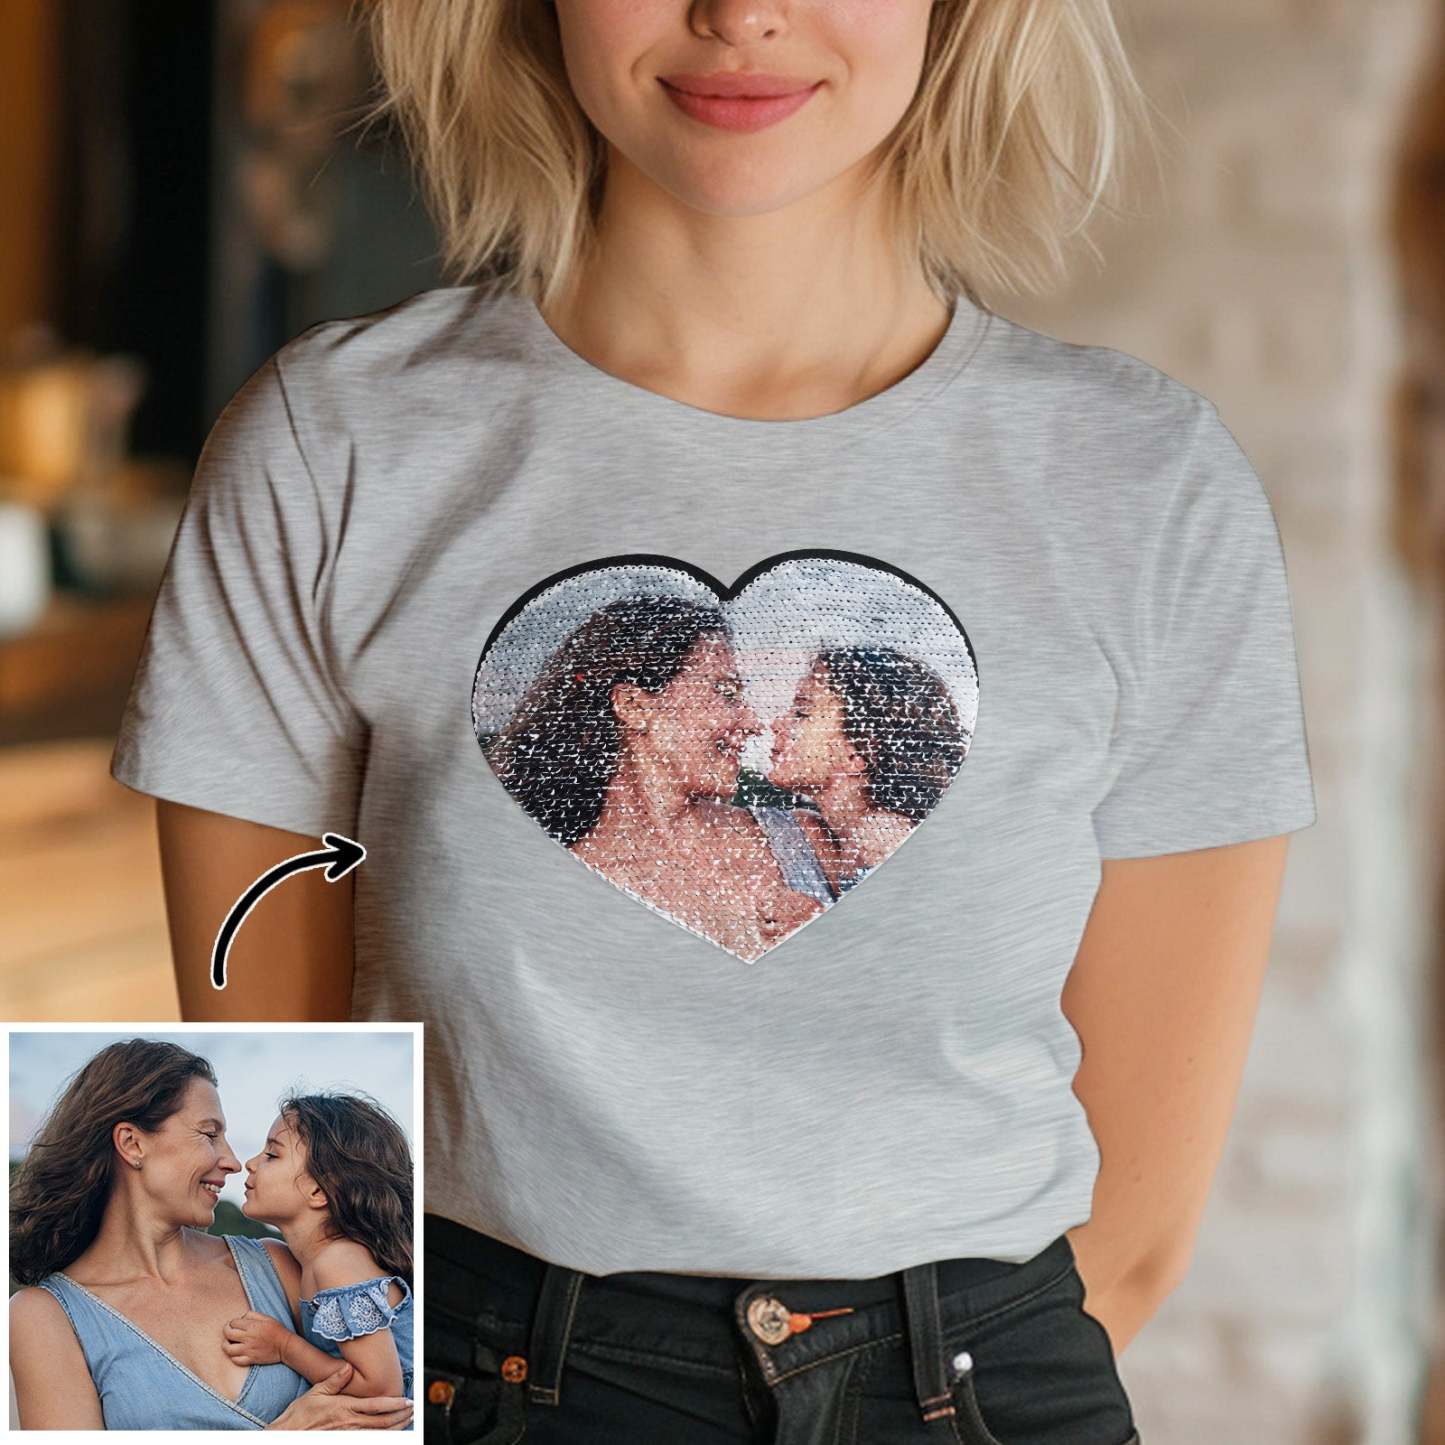 Custom Photo Heart Flip Double Sided Sequin T-shirt Personalised Picture Sequin Tee Mother's Day Gifts - soufeeluk